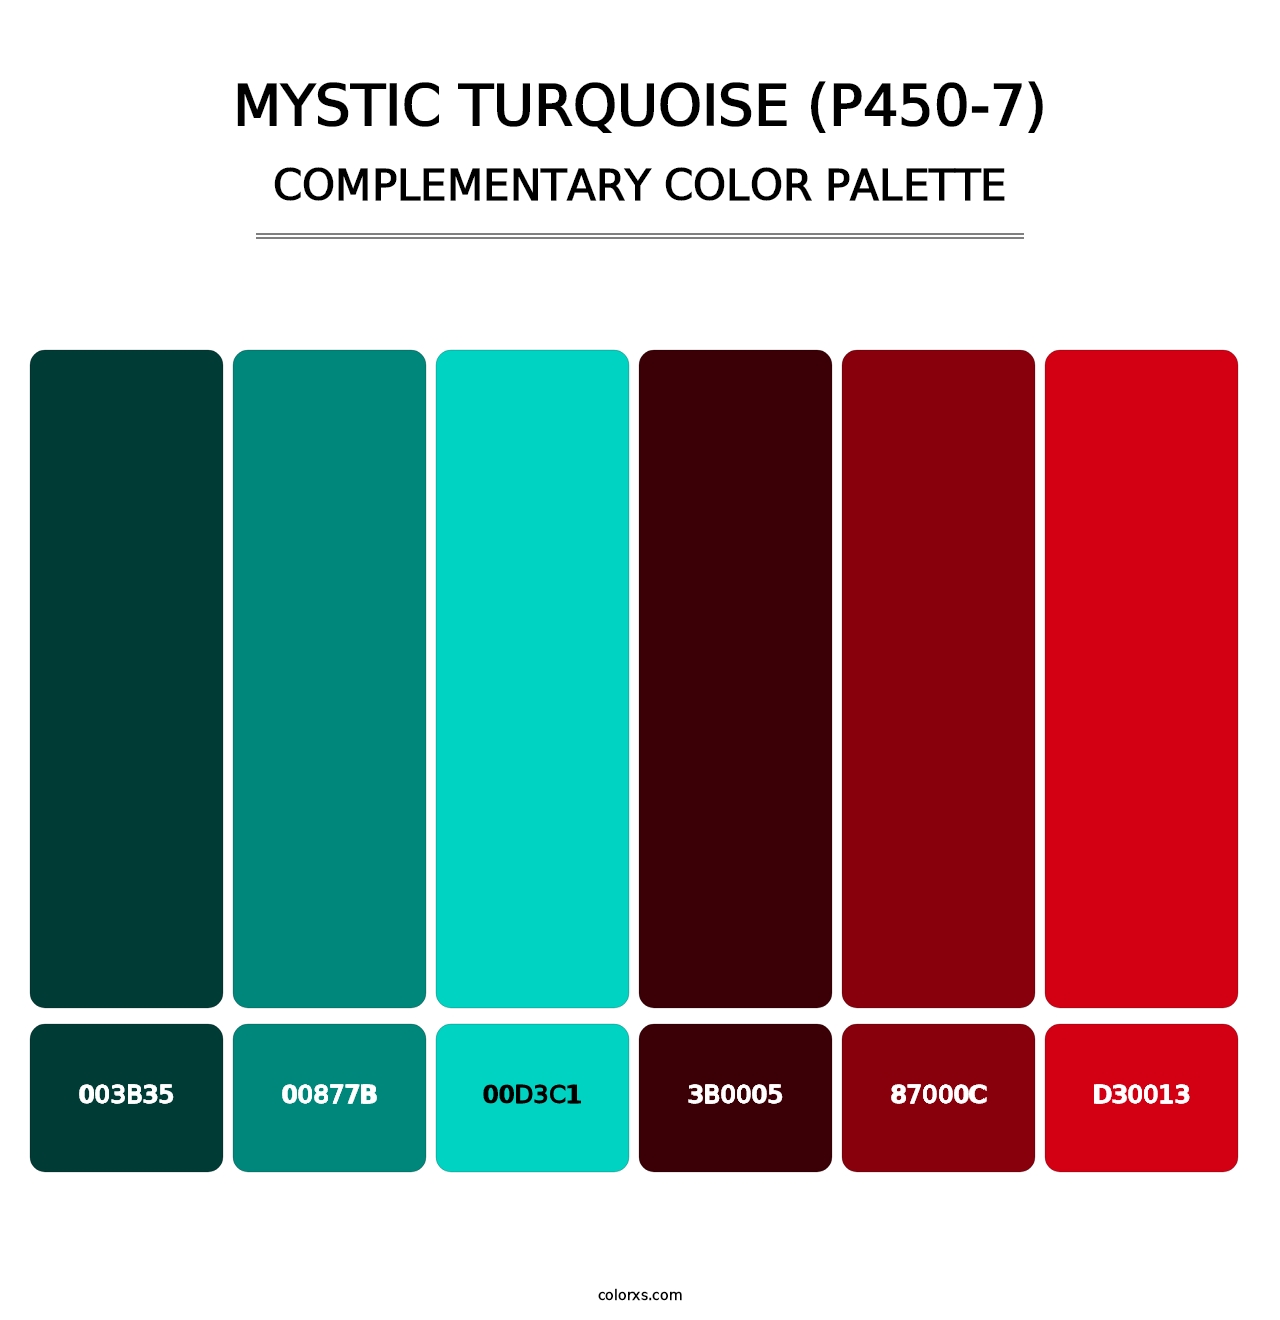 Mystic Turquoise (P450-7) - Complementary Color Palette